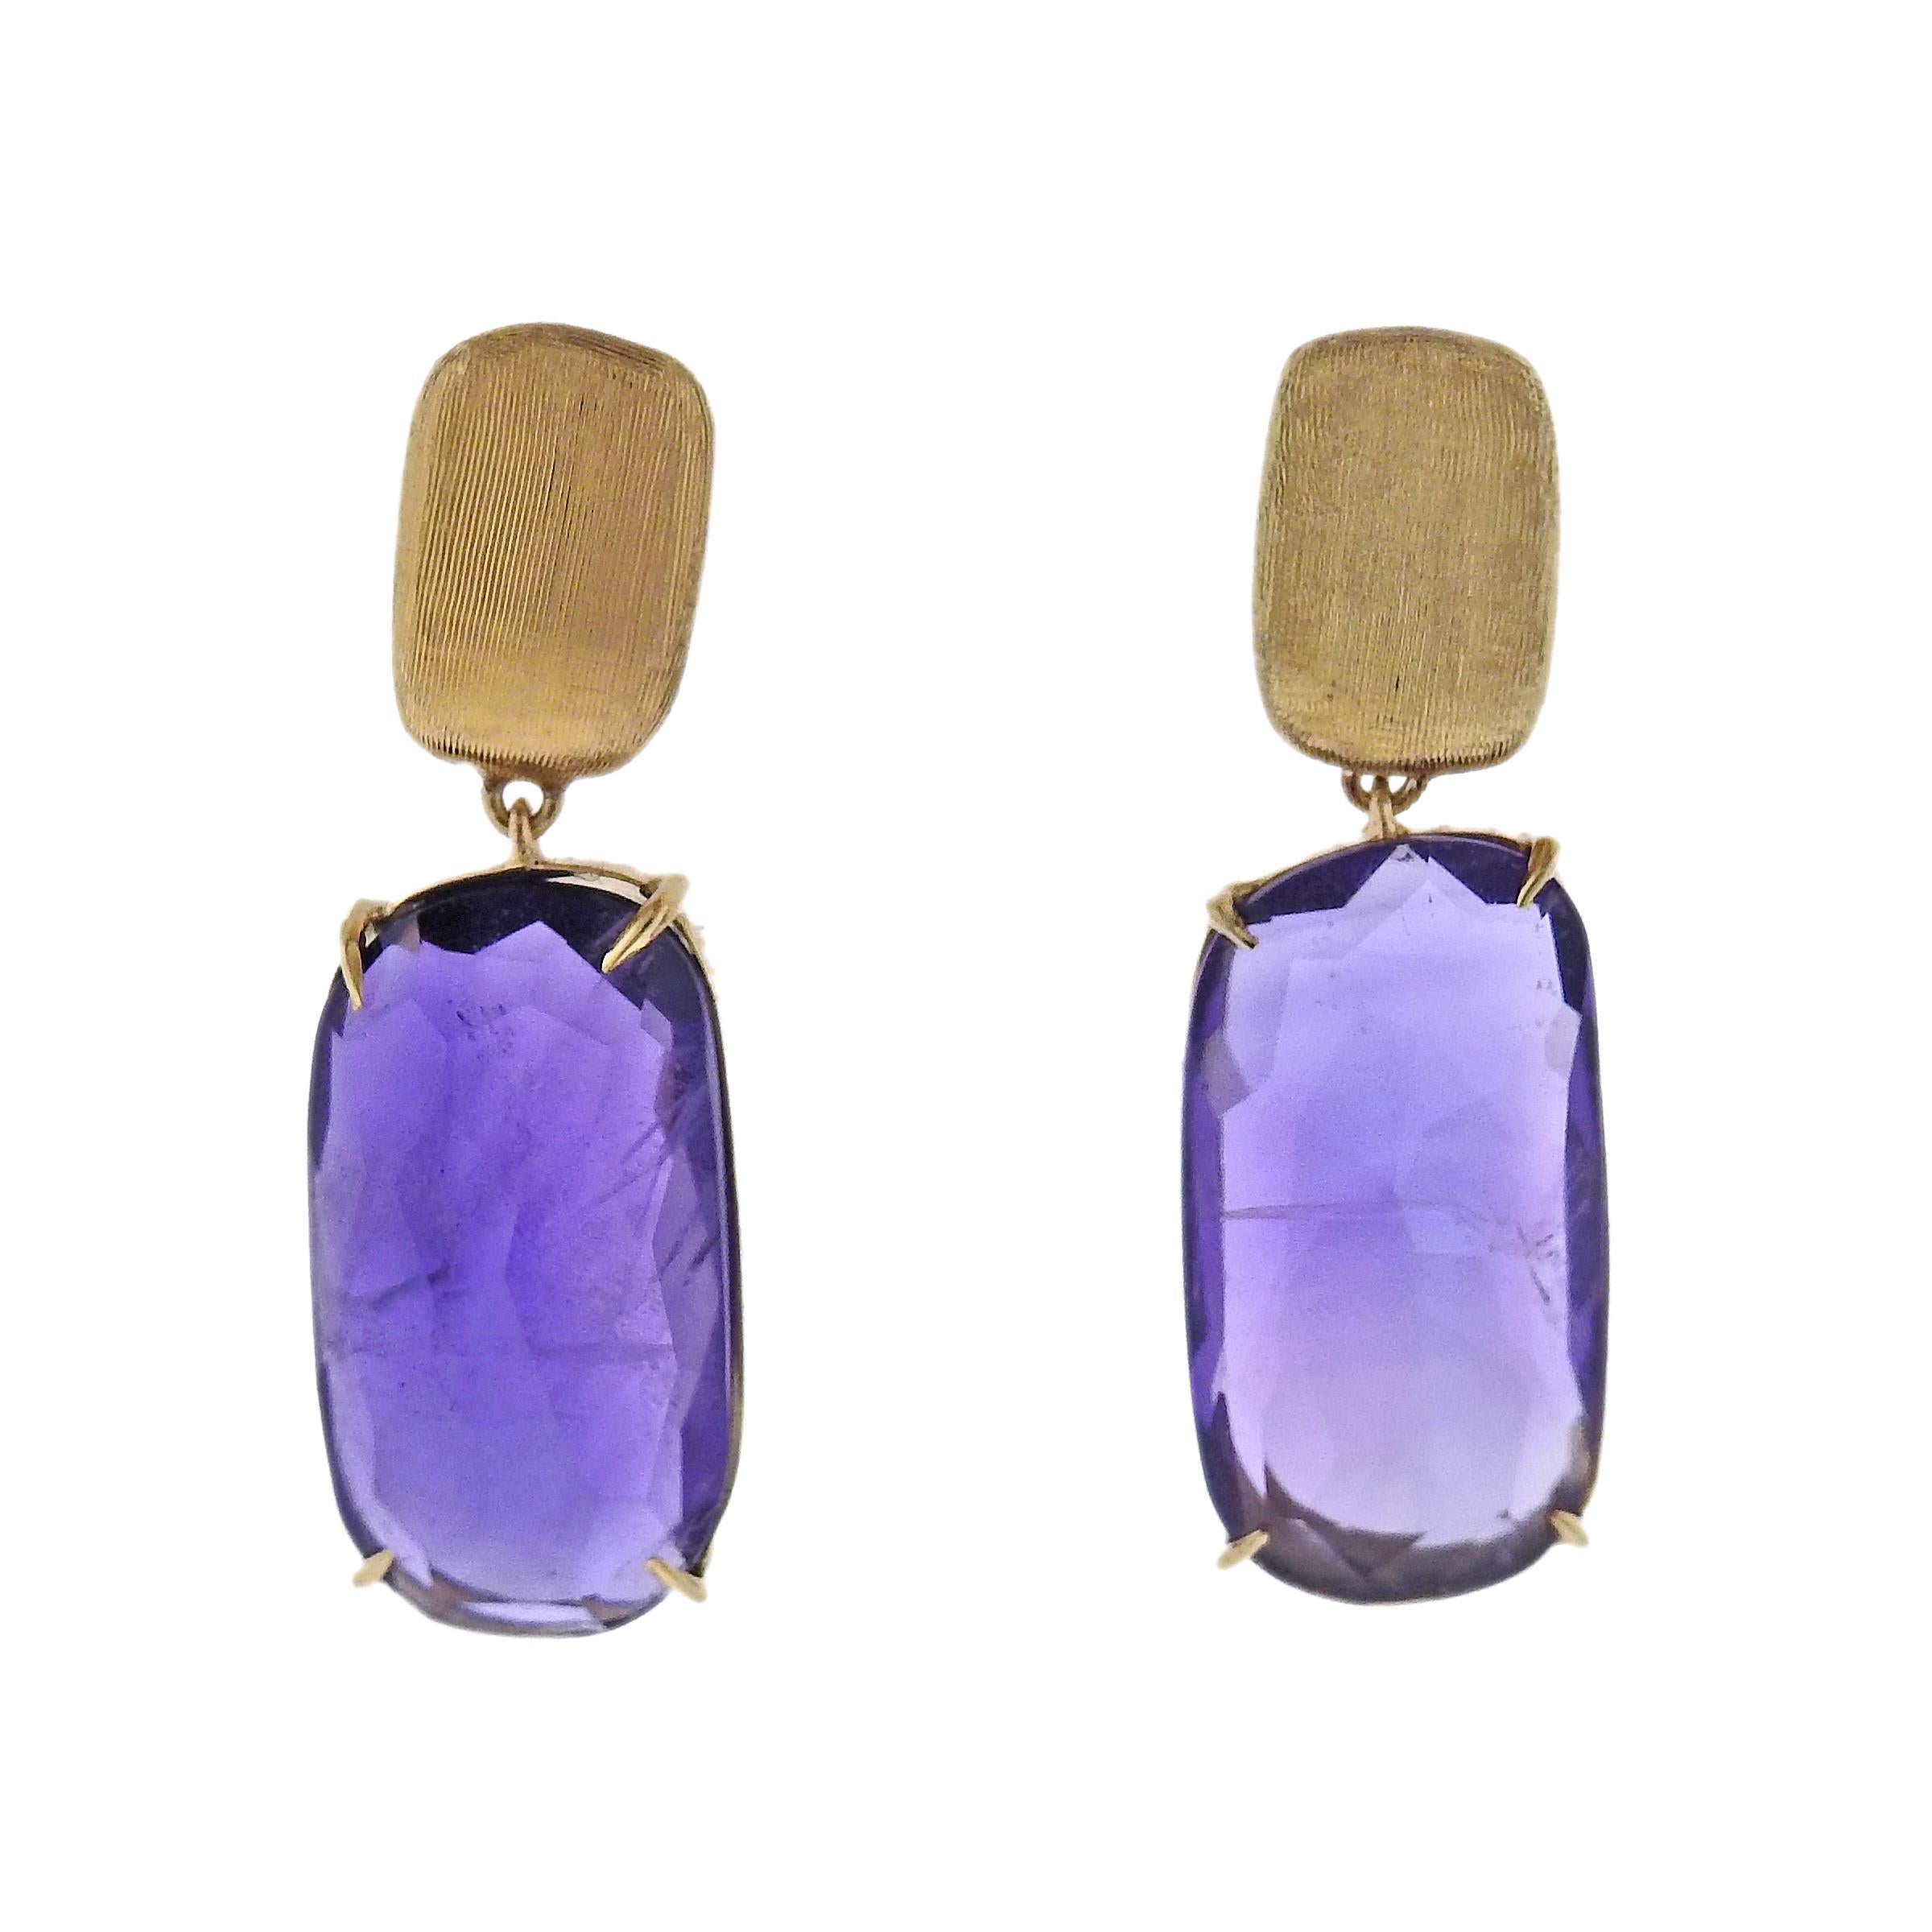 Marco Bicego Murano collection 18K yellow gold drop earrings, set with amethys gemstone. Earrings are 28mm long and 9mm at the widest point. Marked: Marco Bicego, Made in Italy, 750. Weight is 5.6 grams. 